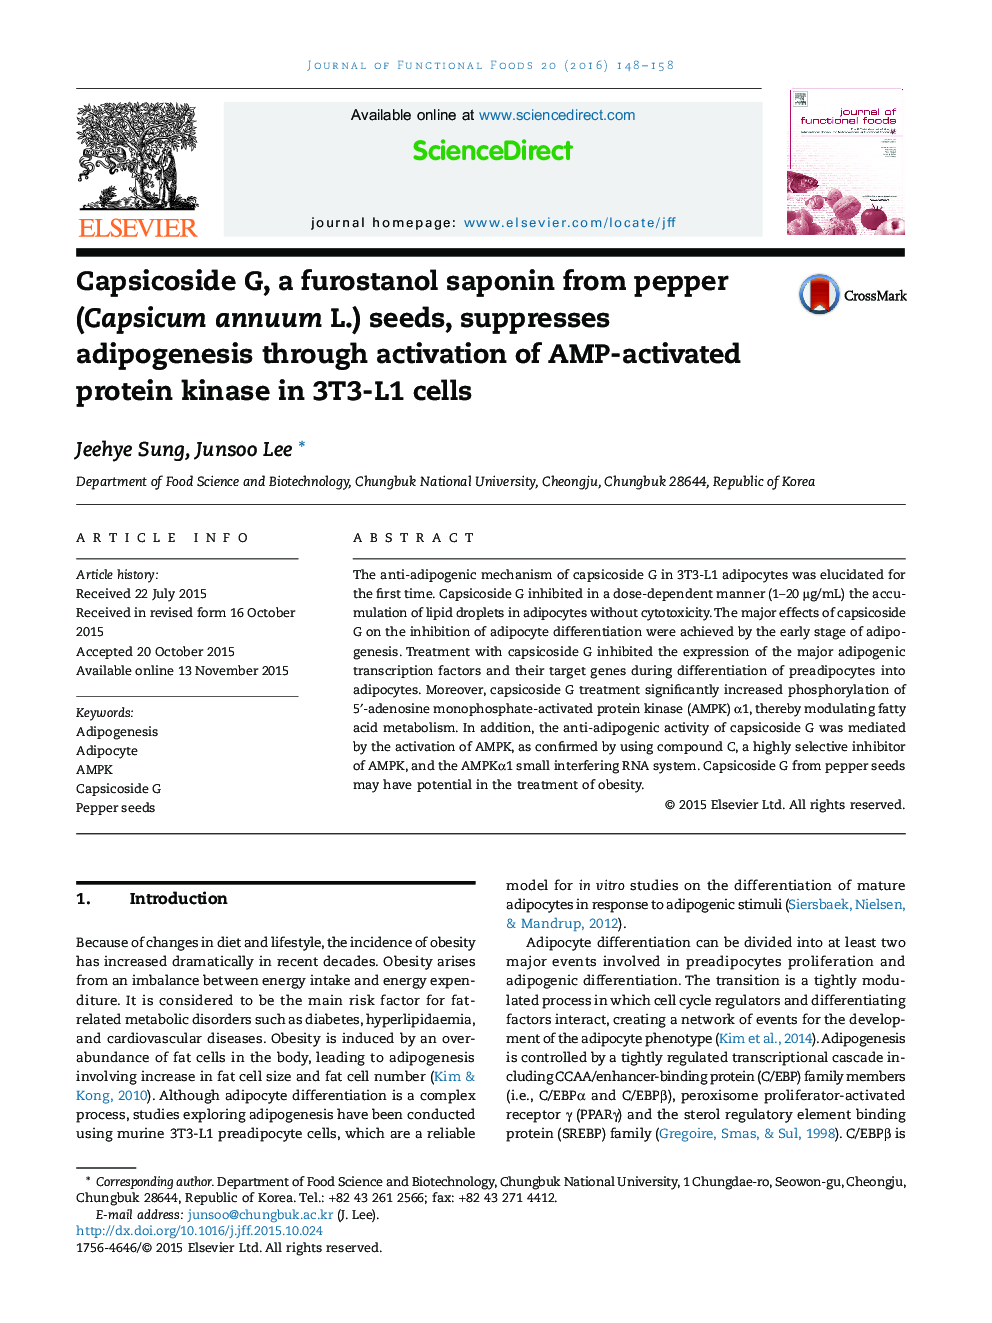 Capsicoside G, a furostanol saponin from pepper (Capsicum annuum L.) seeds, suppresses adipogenesis through activation of AMP-activated protein kinase in 3T3-L1 cells